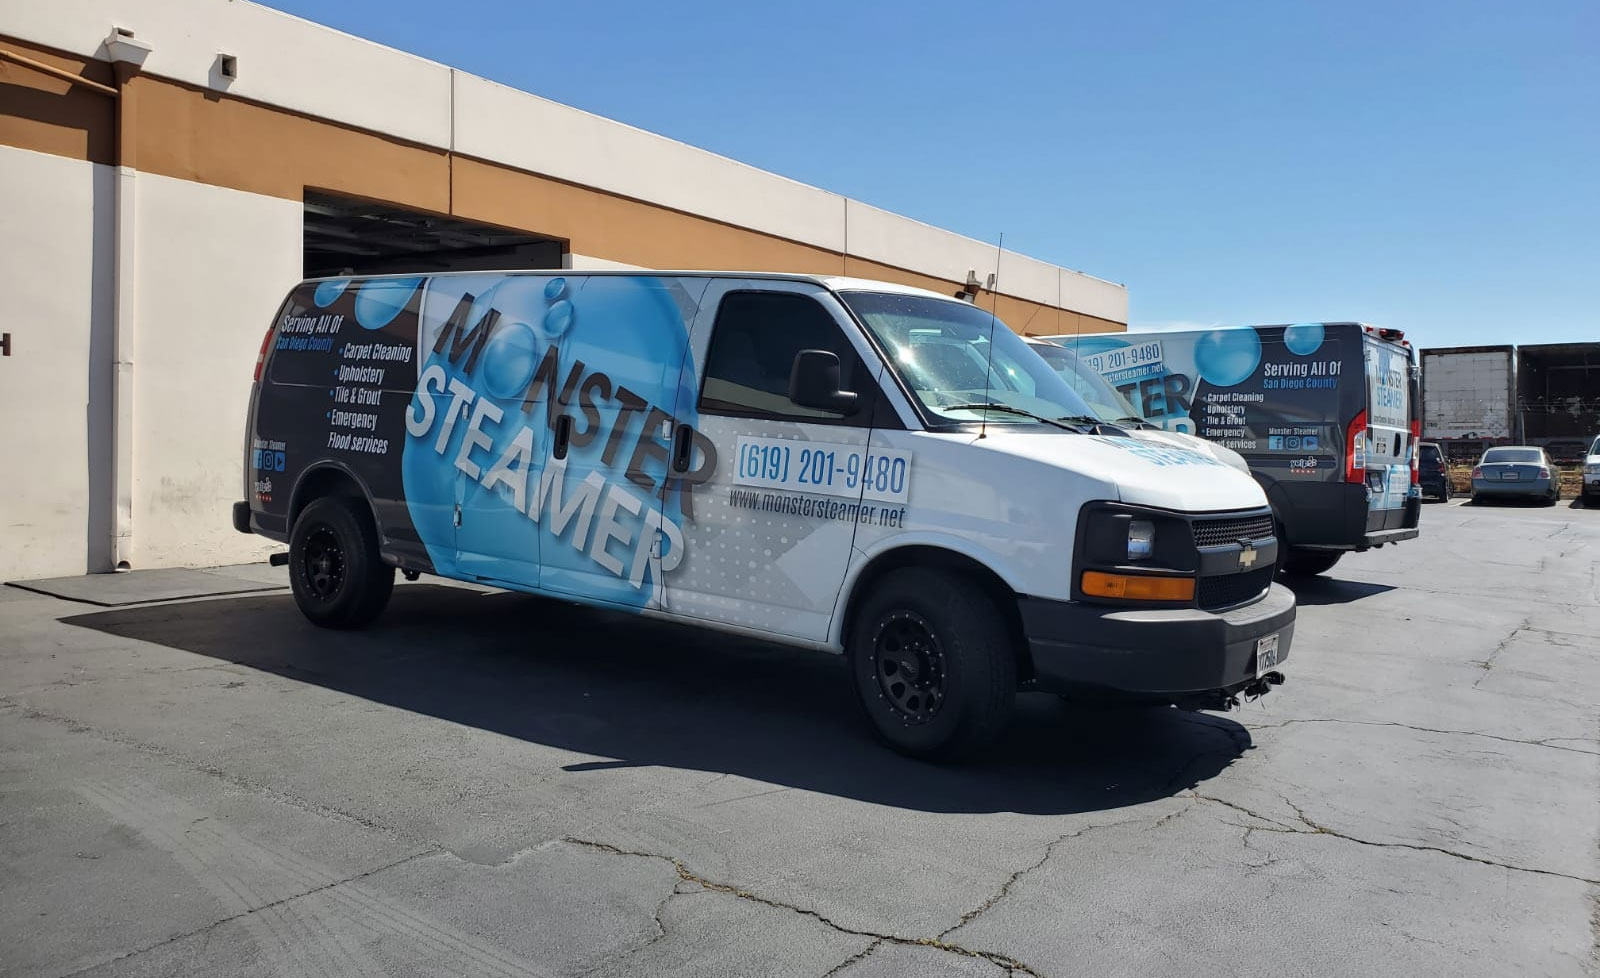 Monster Steamer Carpet Cleaning San Diego Upholstery Rugs Tile Commercial Cleaning Services Carpet Cleaning Services In San Diego